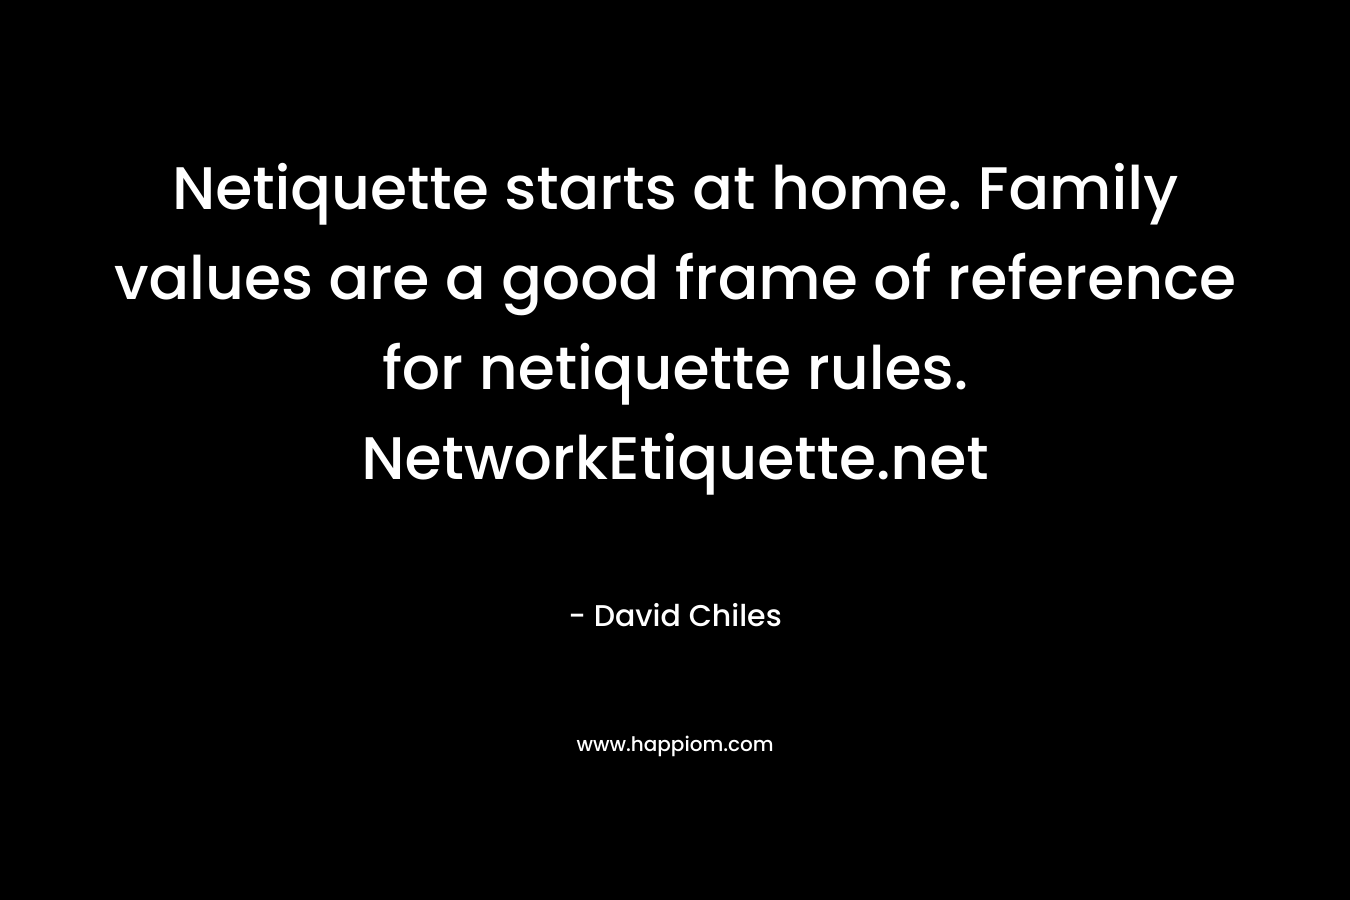 Netiquette starts at home. Family values are a good frame of reference for netiquette rules. NetworkEtiquette.net – David Chiles